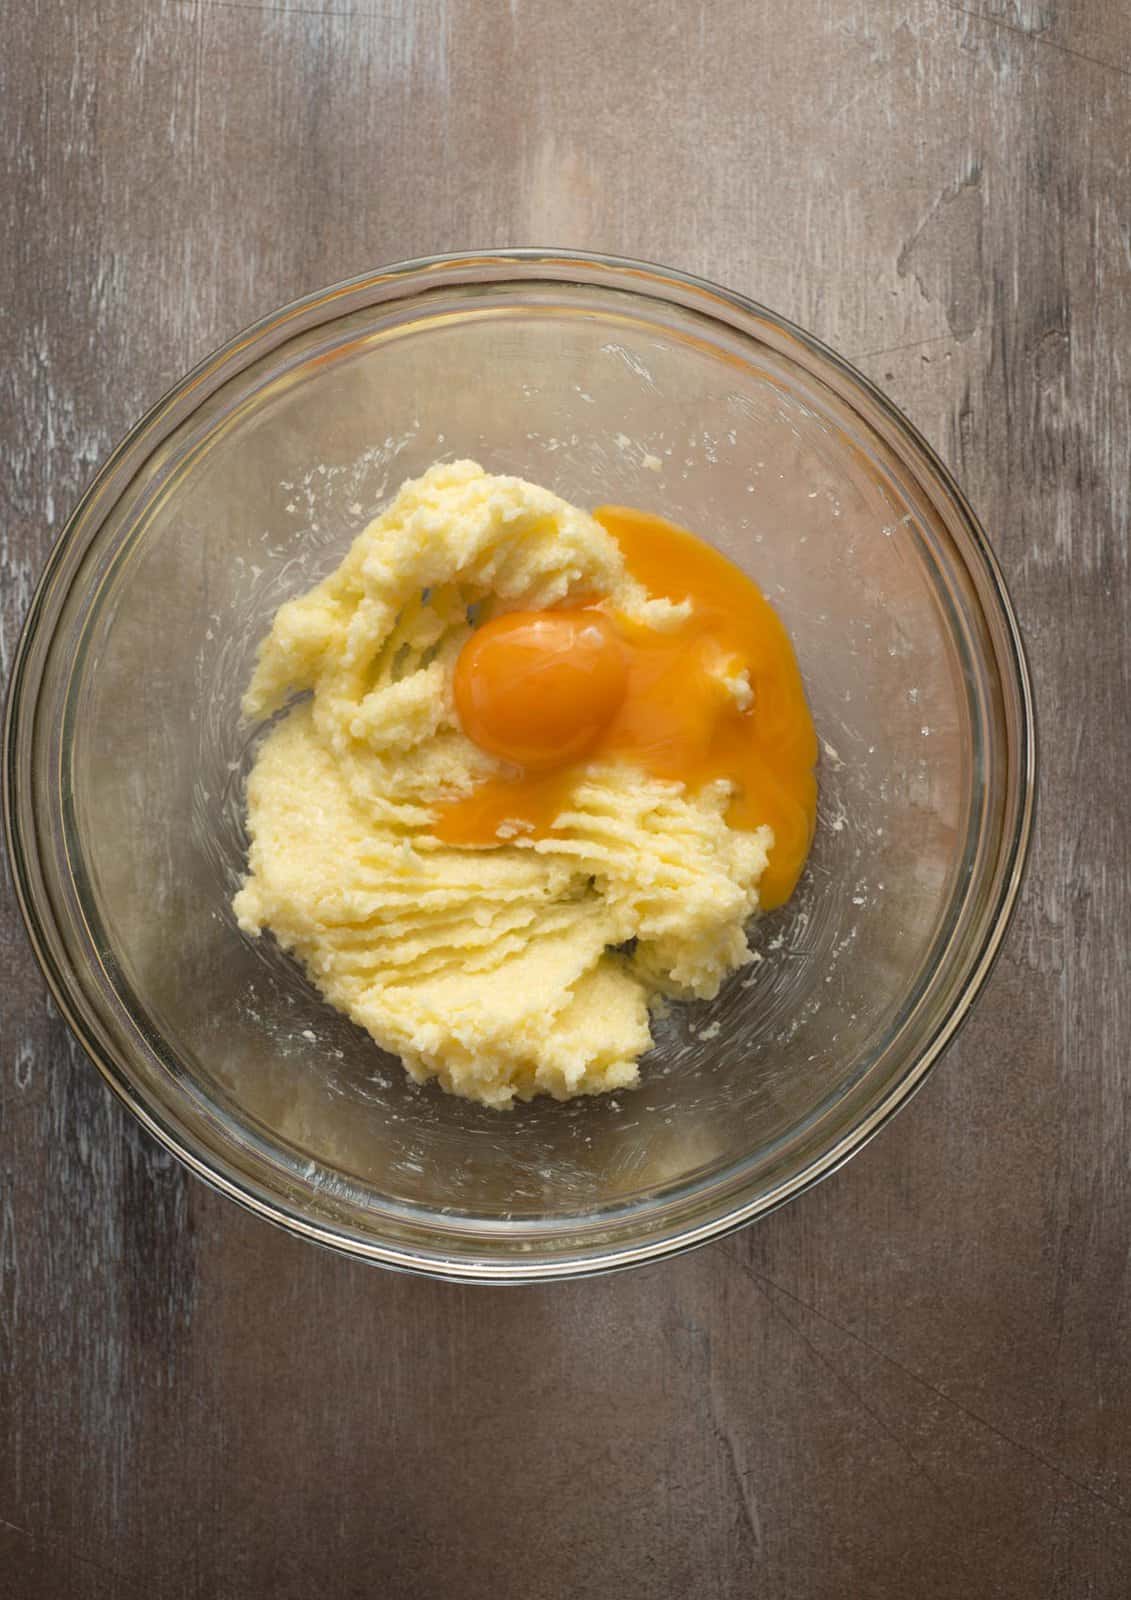 Egg yolks and vanilla added to butter and sugar mixture.